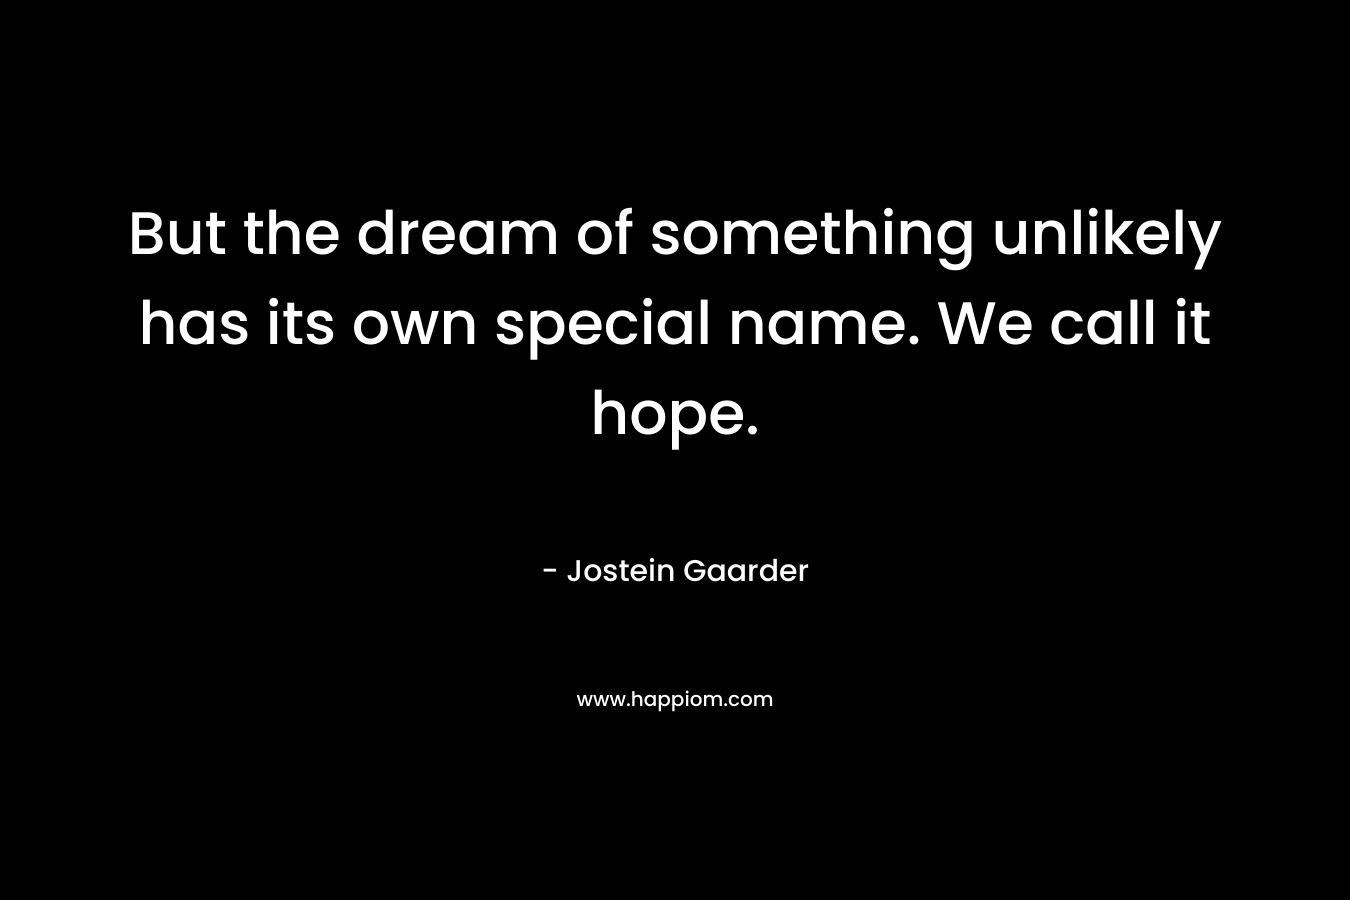 But the dream of something unlikely has its own special name. We call it hope.